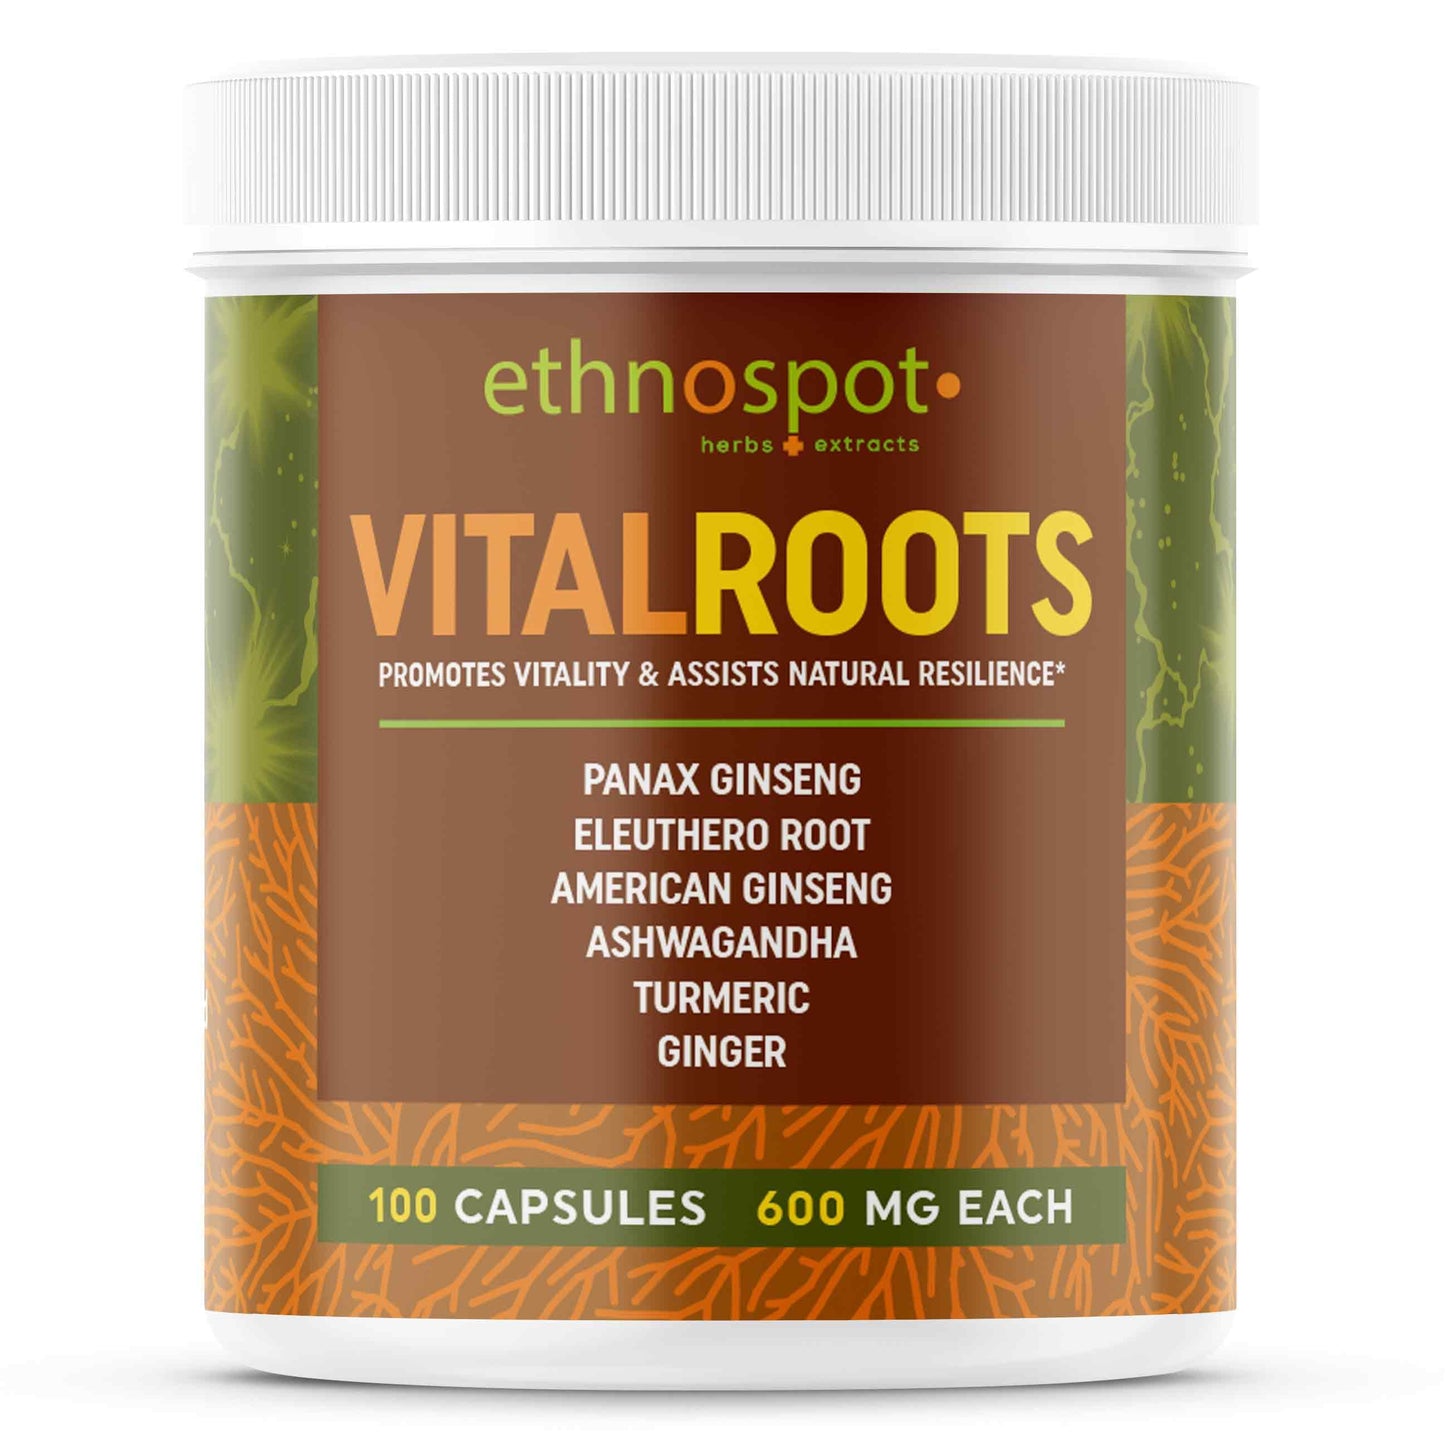 VitalRoots Capsules - Immune Support & Vitality Promoting Herbal Supplement